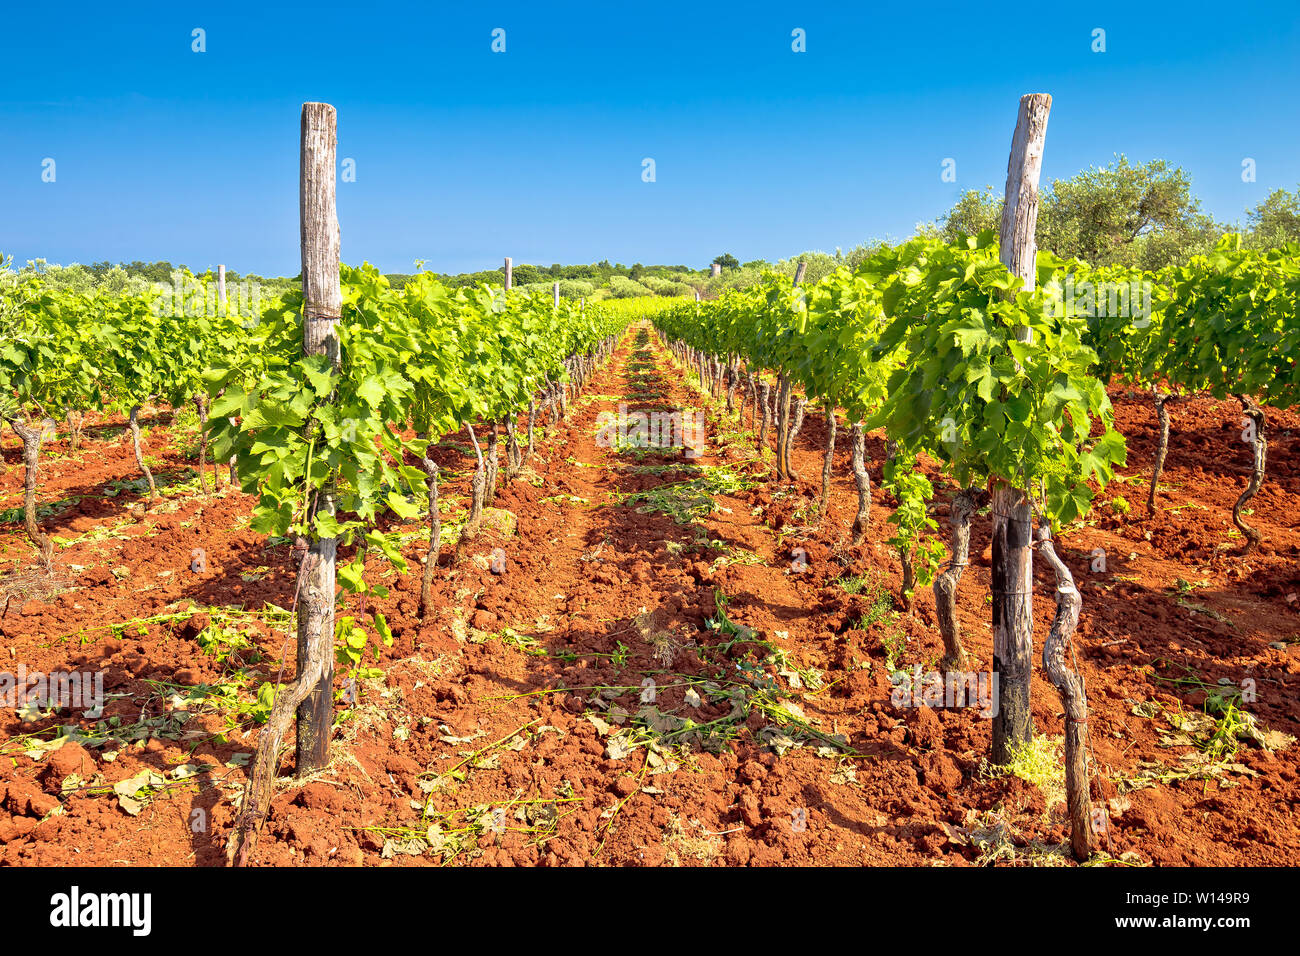 Red dirt istrian vineyard and green landscape view, Istria region of Croatia Stock Photo